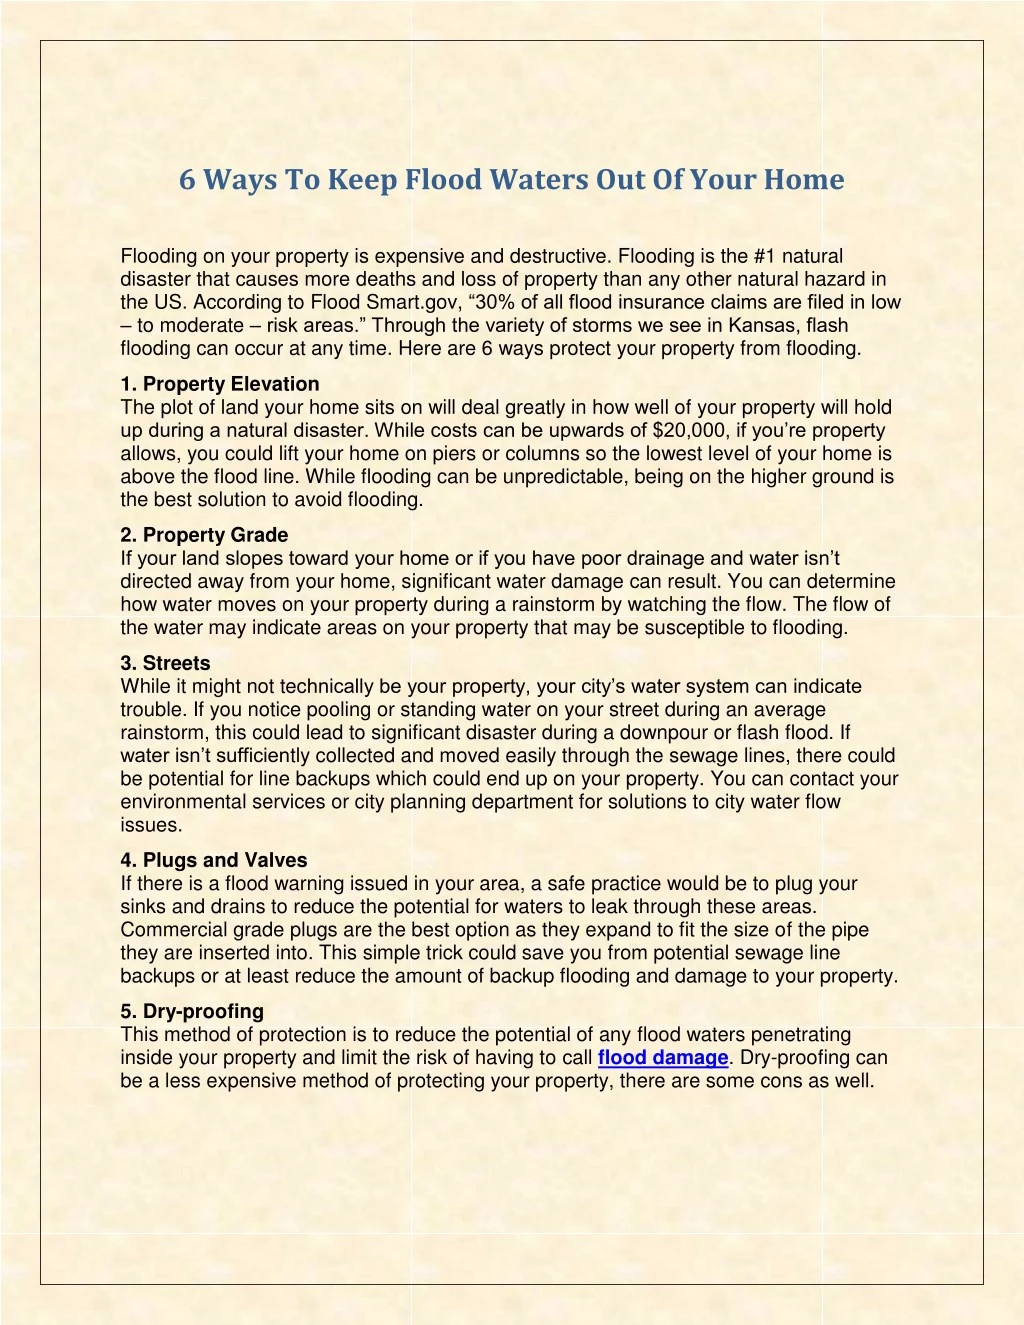 6 ways to keep flood waters out of your home